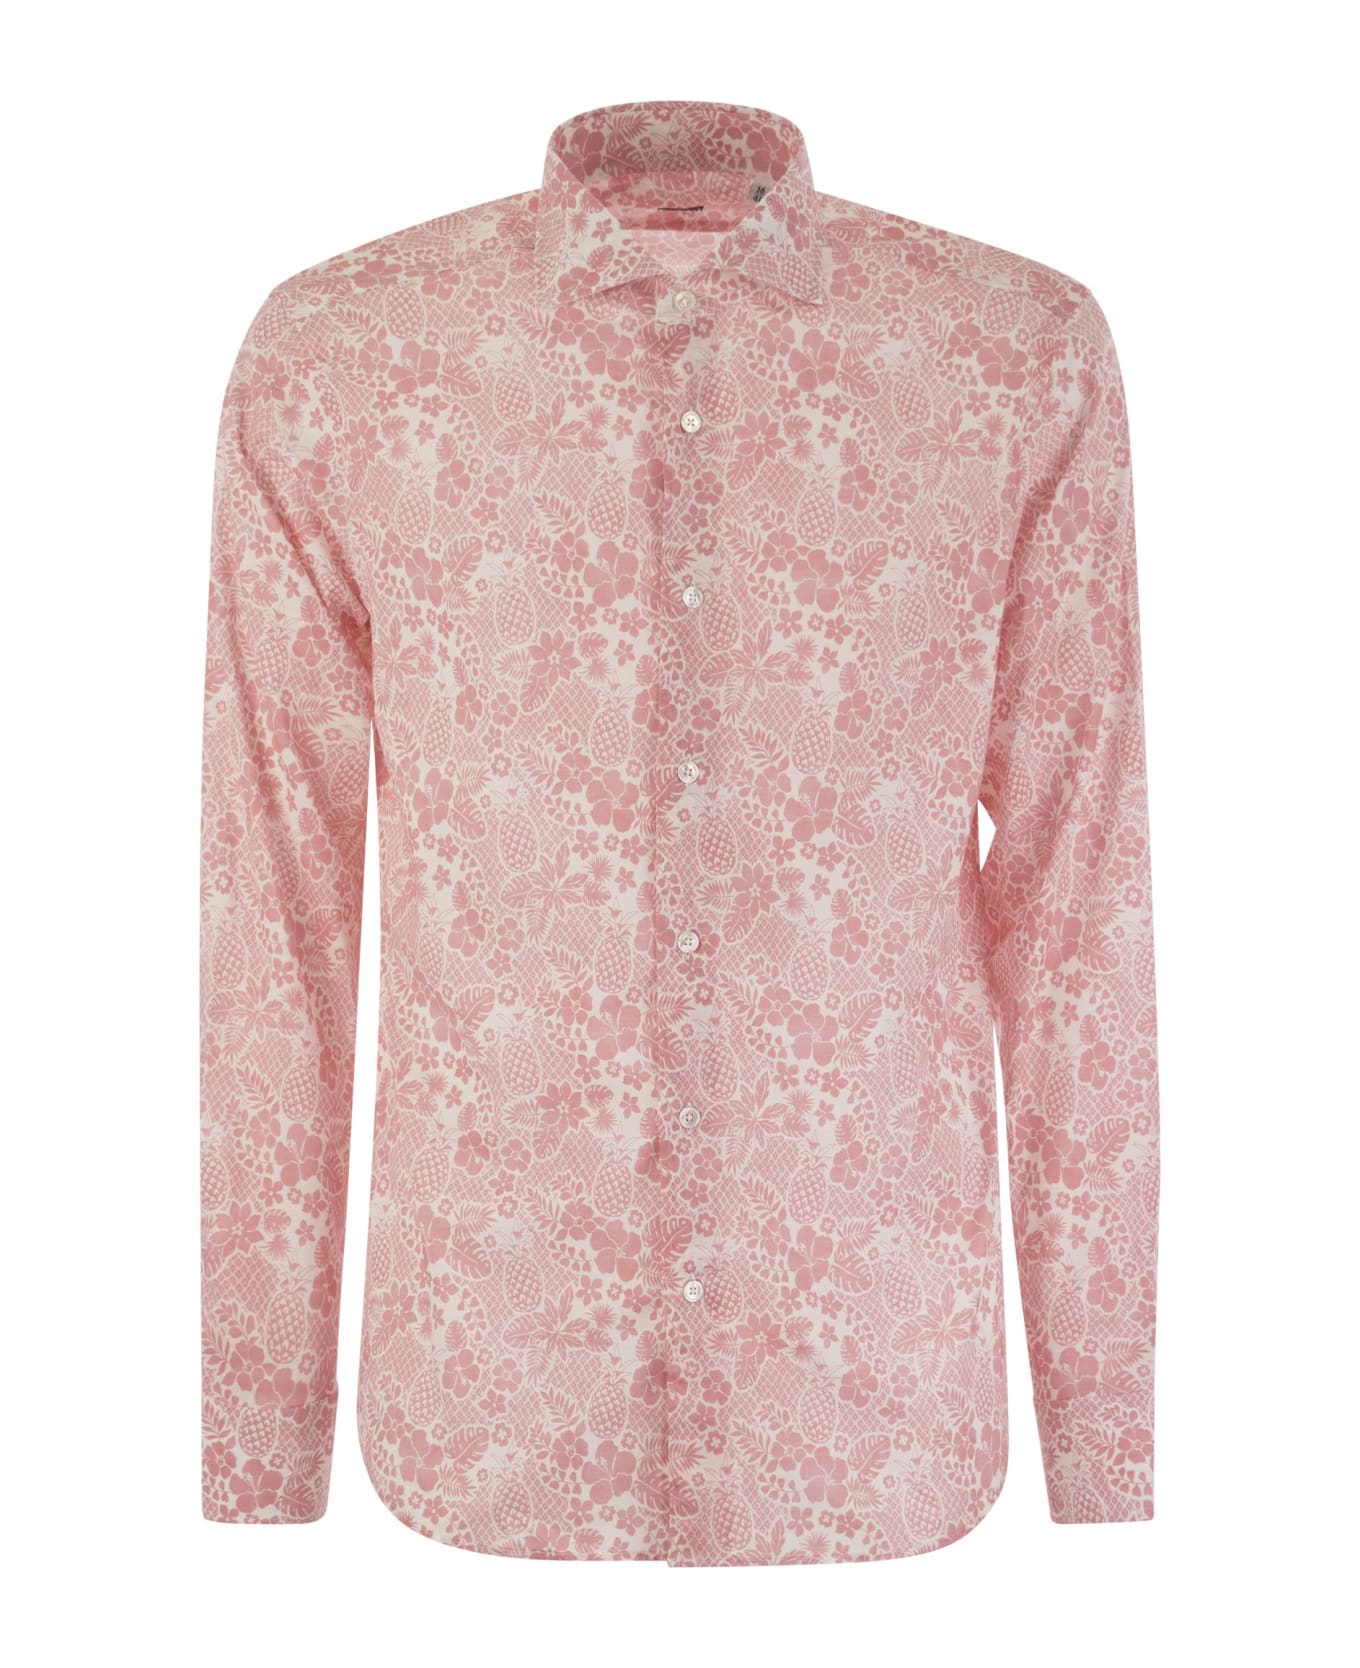 Fedeli Printed Stretch Cotton Voile Shirt - Pink シャツ